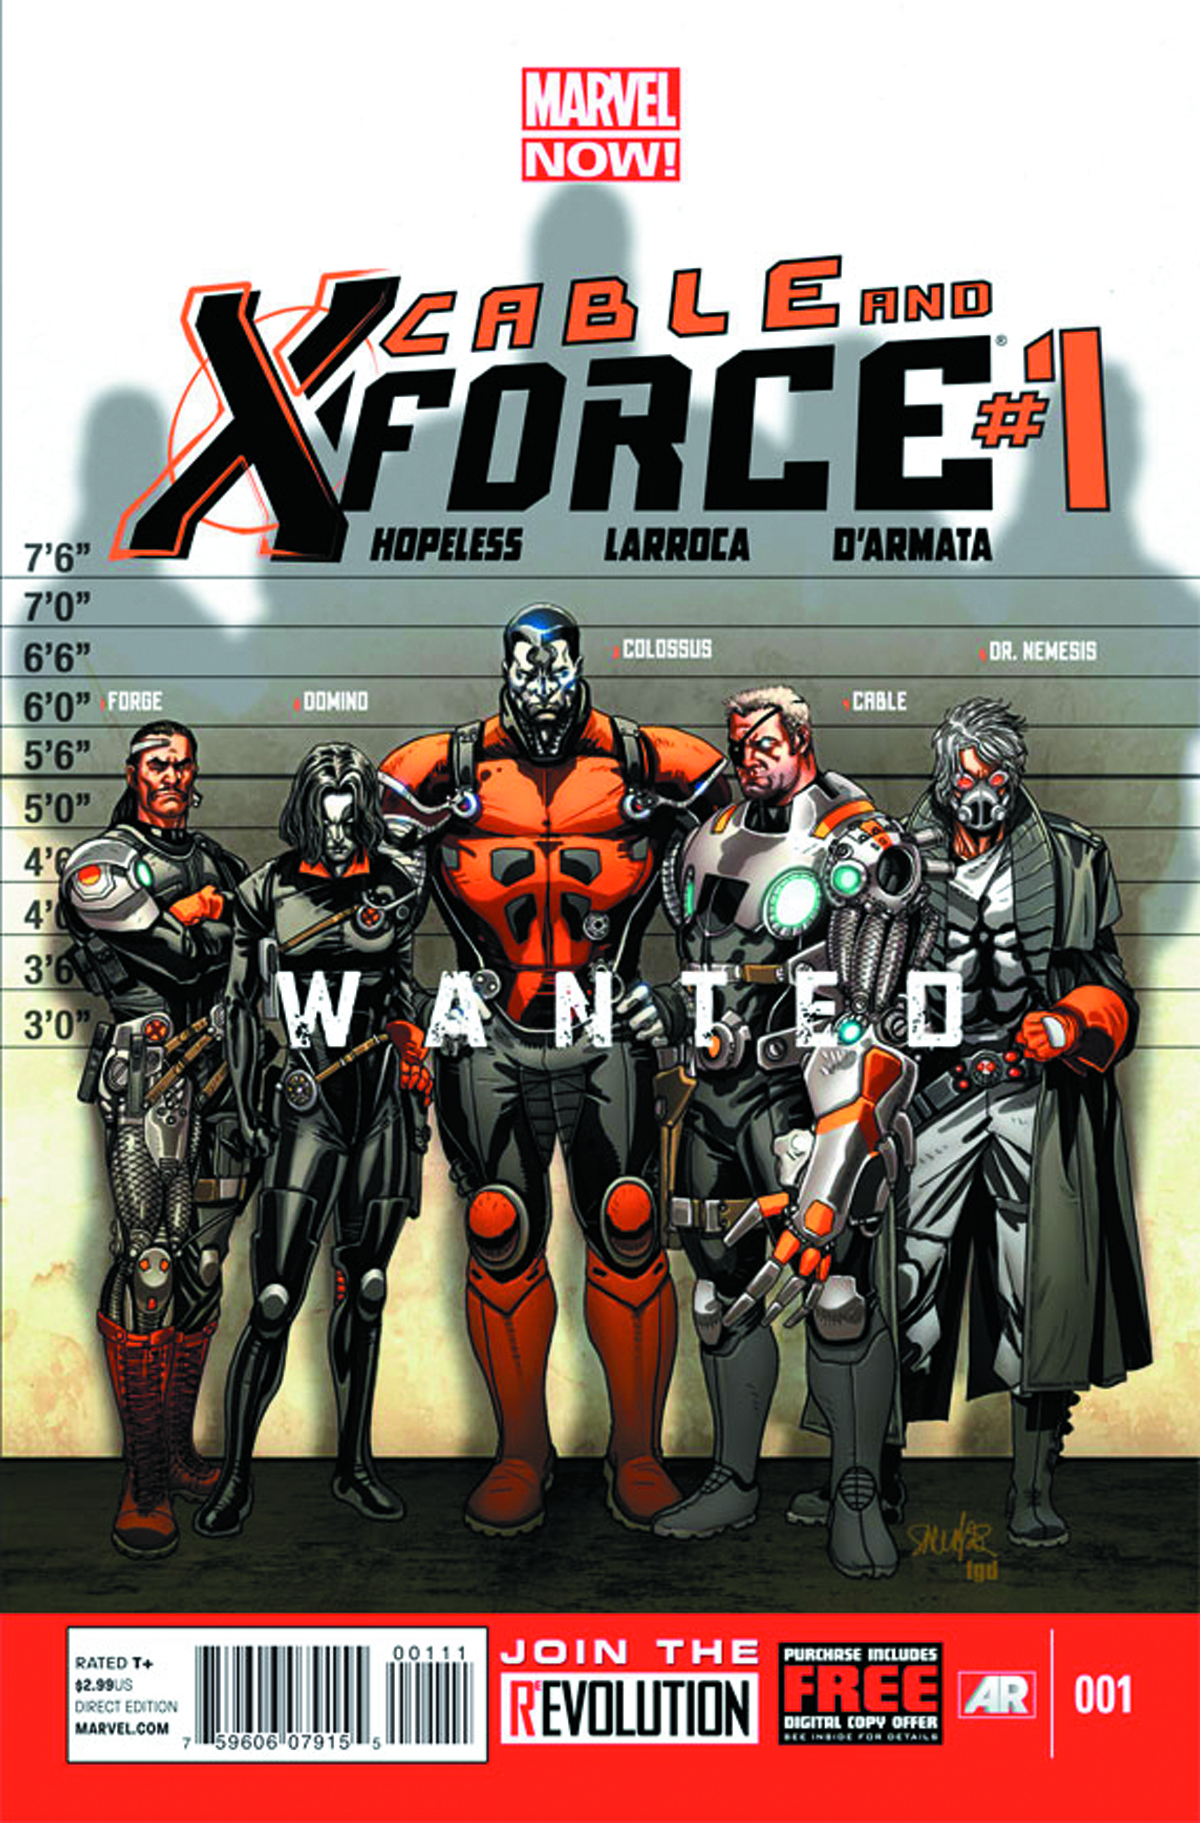 CABLE AND X-FORCE #1 NOW